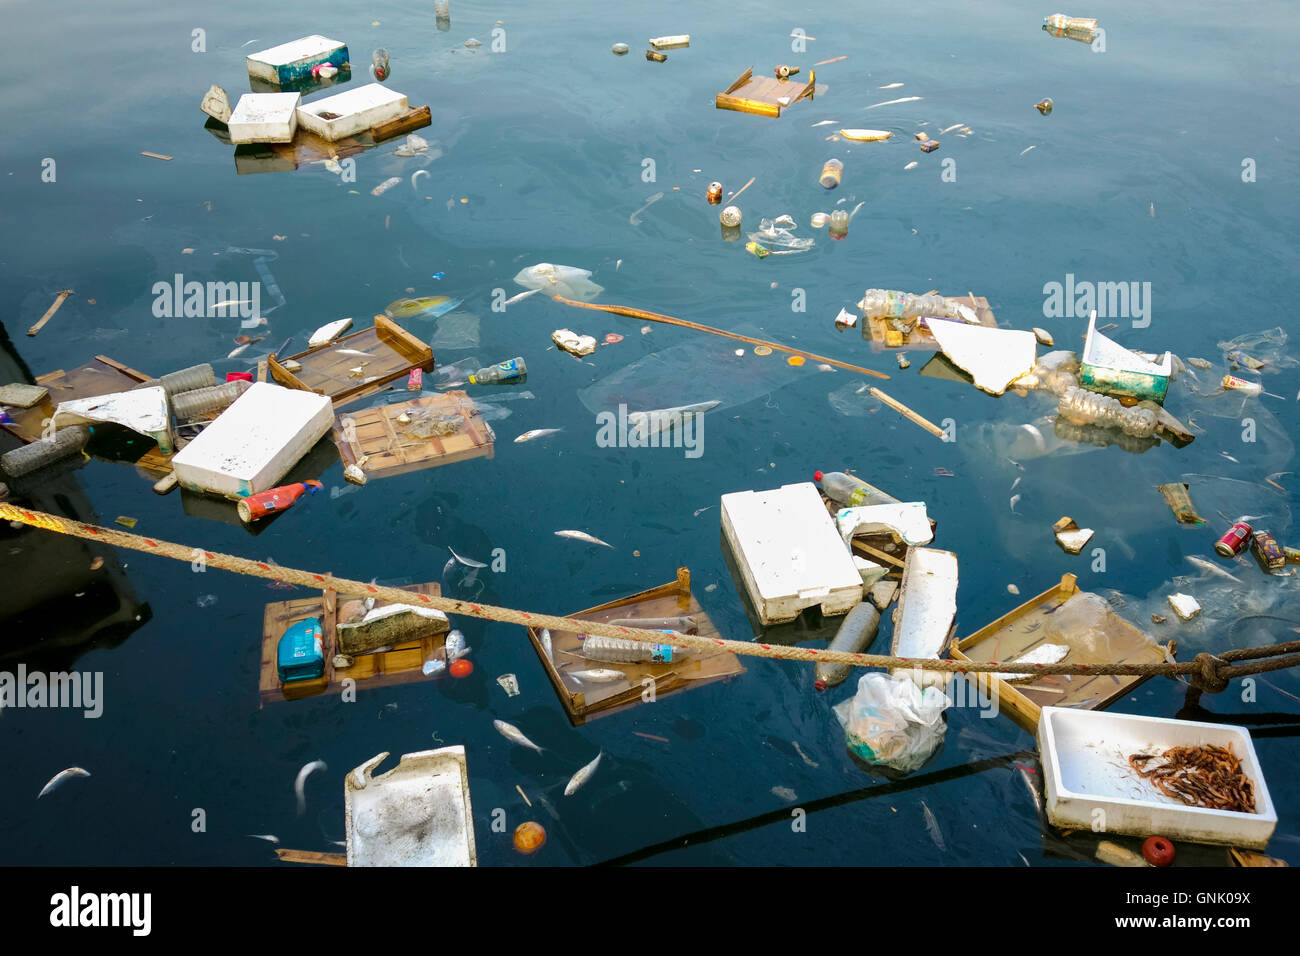 Marine pollution, Waste and rubbish, dead fish floating in sea, Spain. Stock Photo